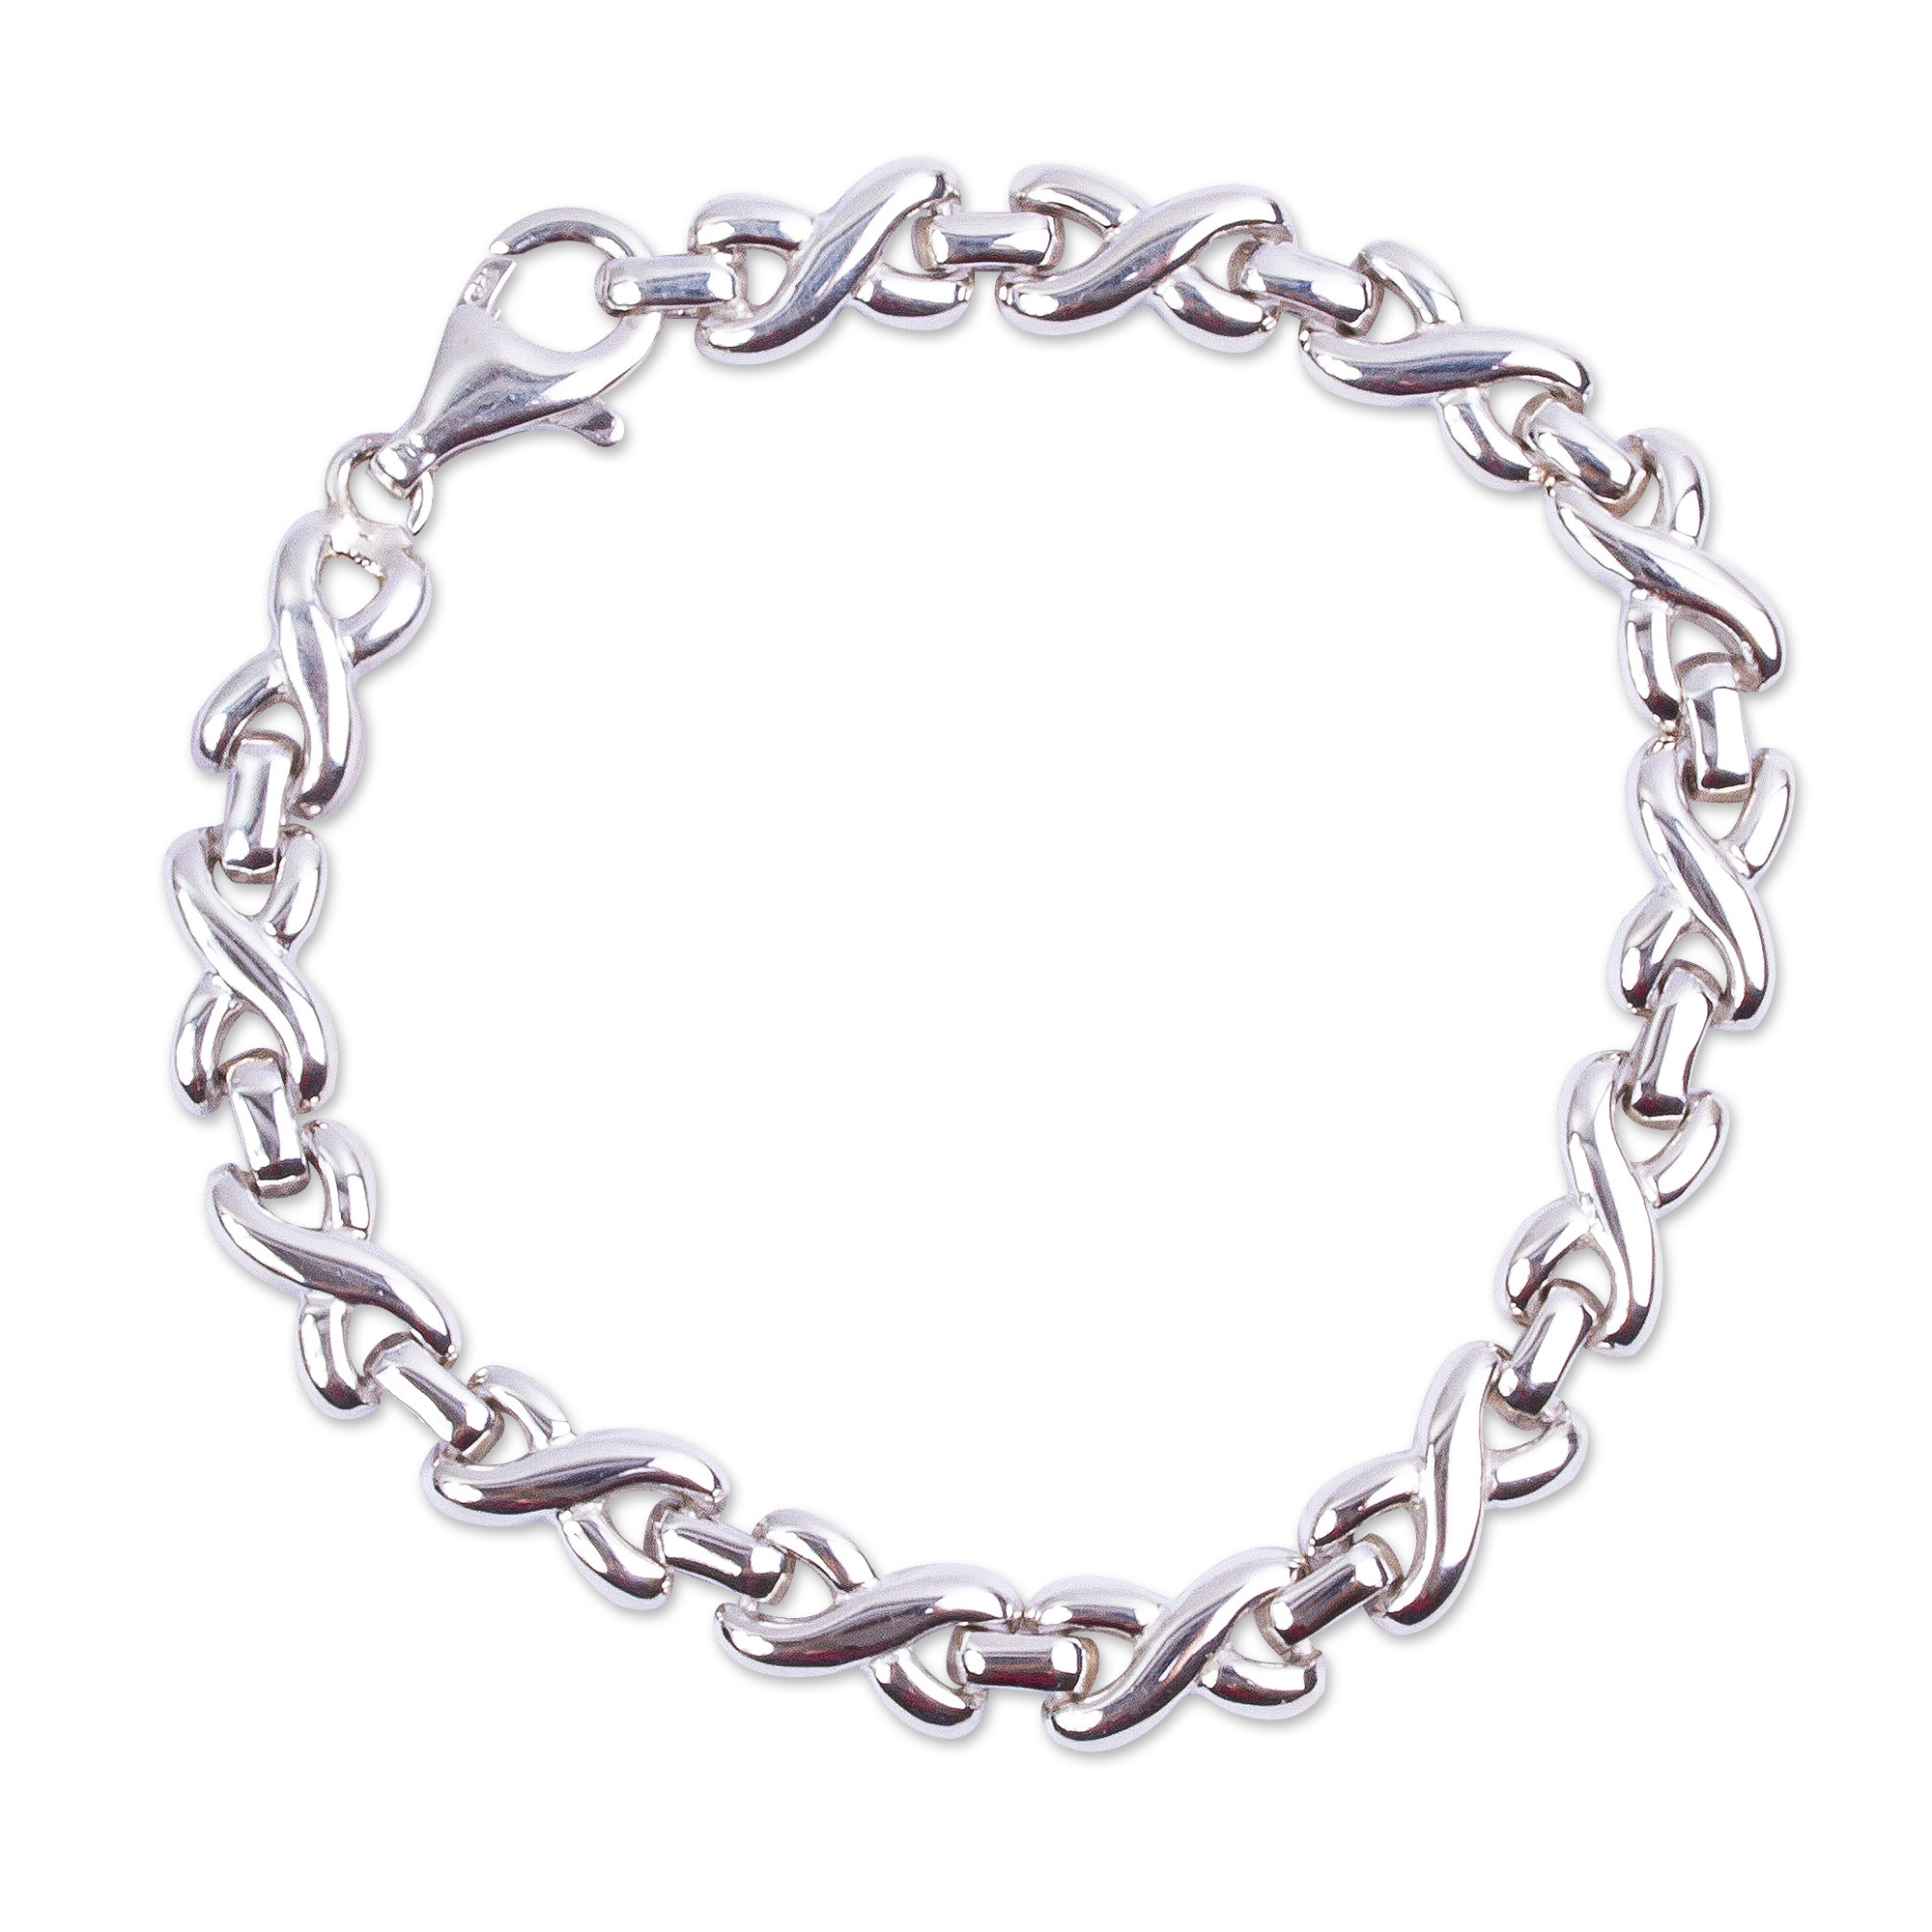 Silver Kiss,'Sterling Silver x and O Chain Link Bracelet from Mexico